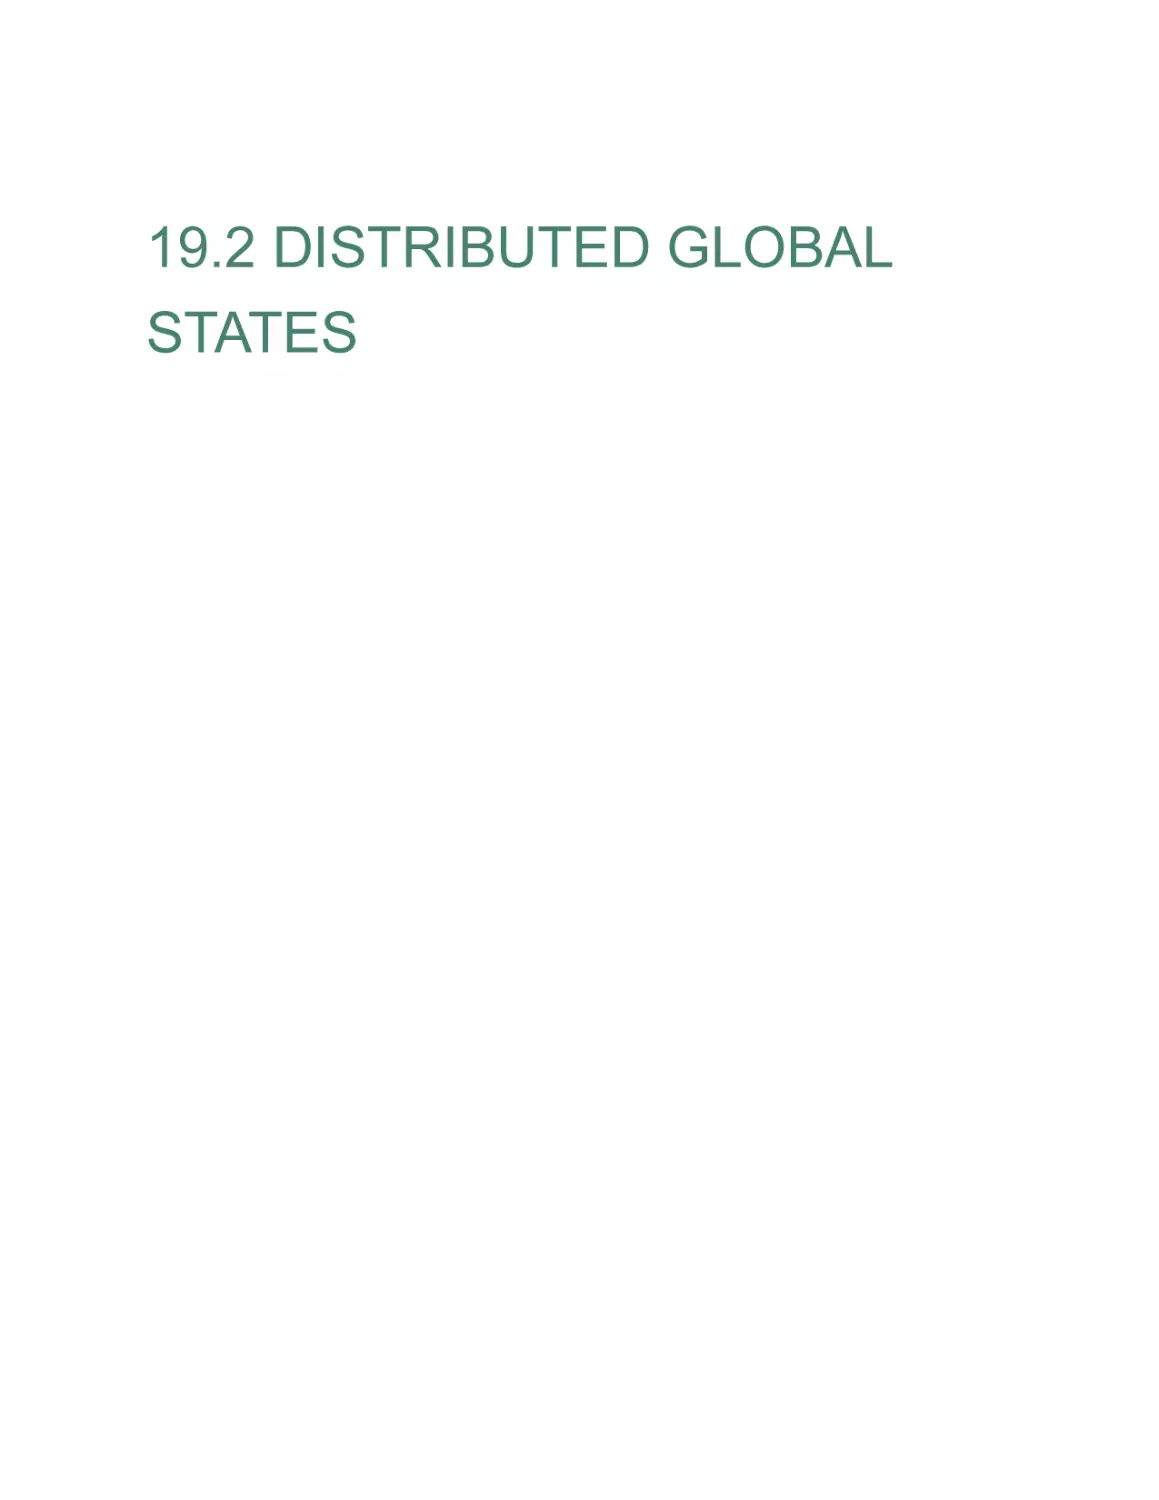 19.2 DISTRIBUTED GLOBAL STATES